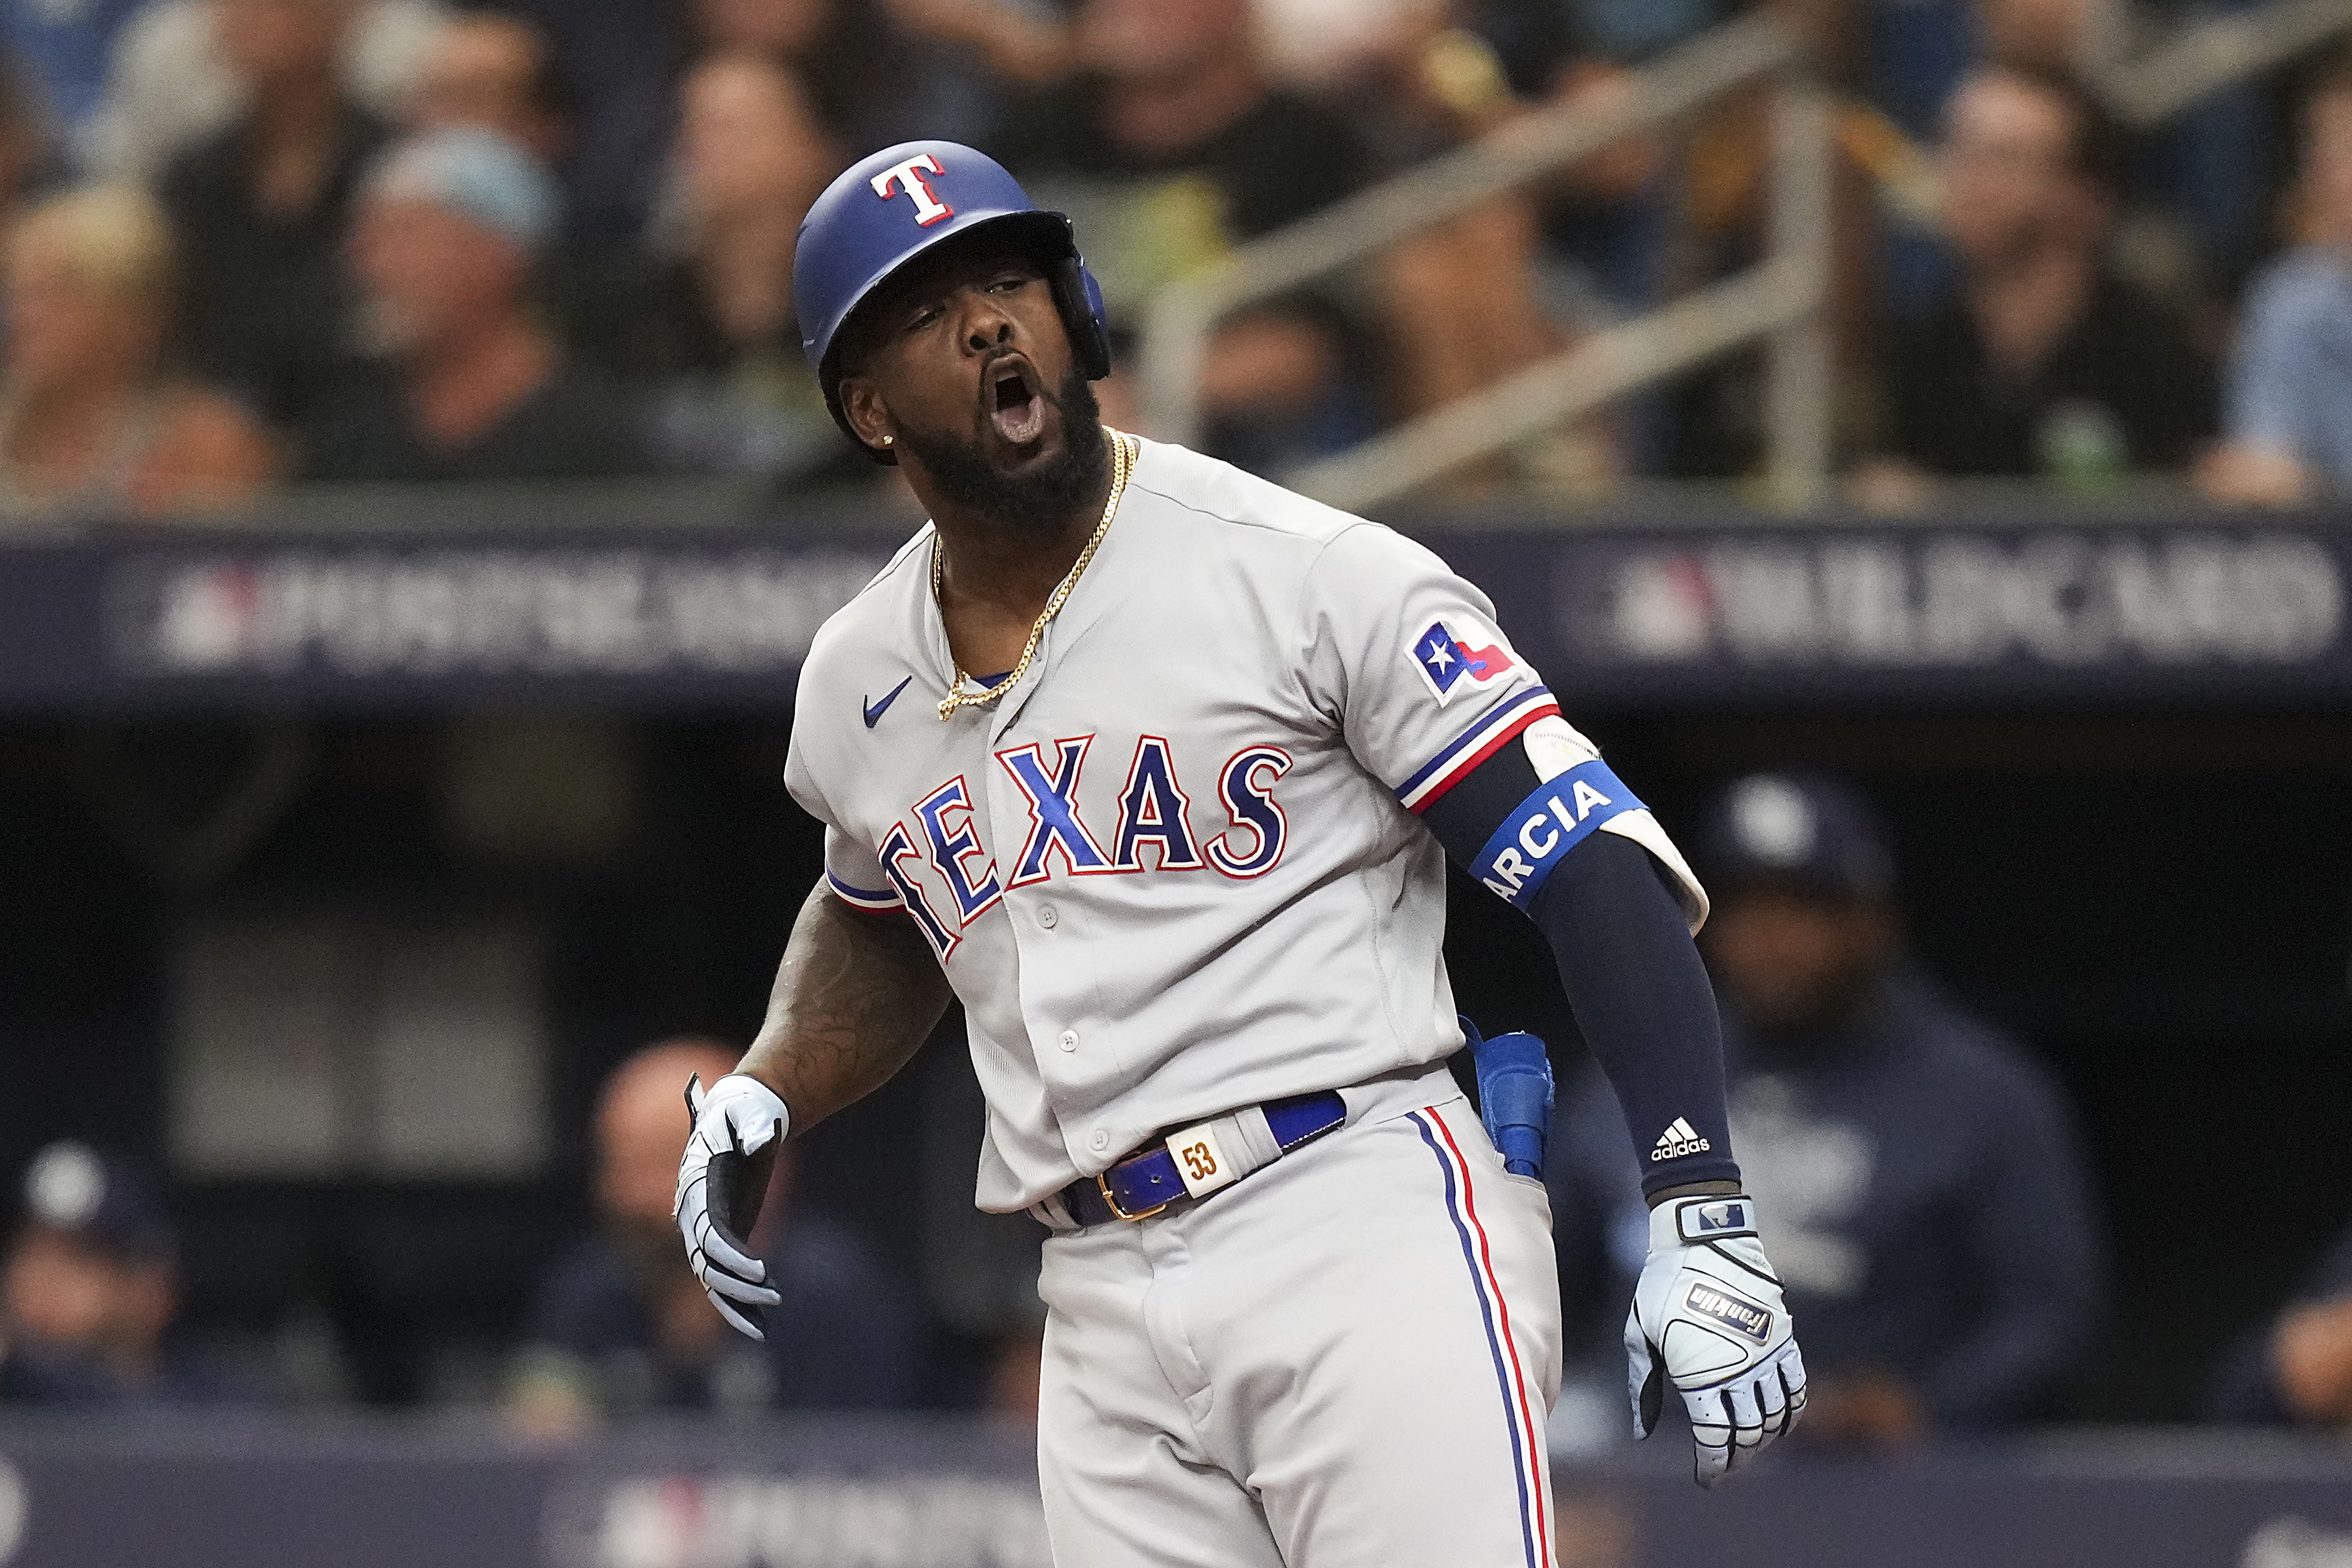 Only One Texas Rangers Player Has Reached 20 Homers Faster Than